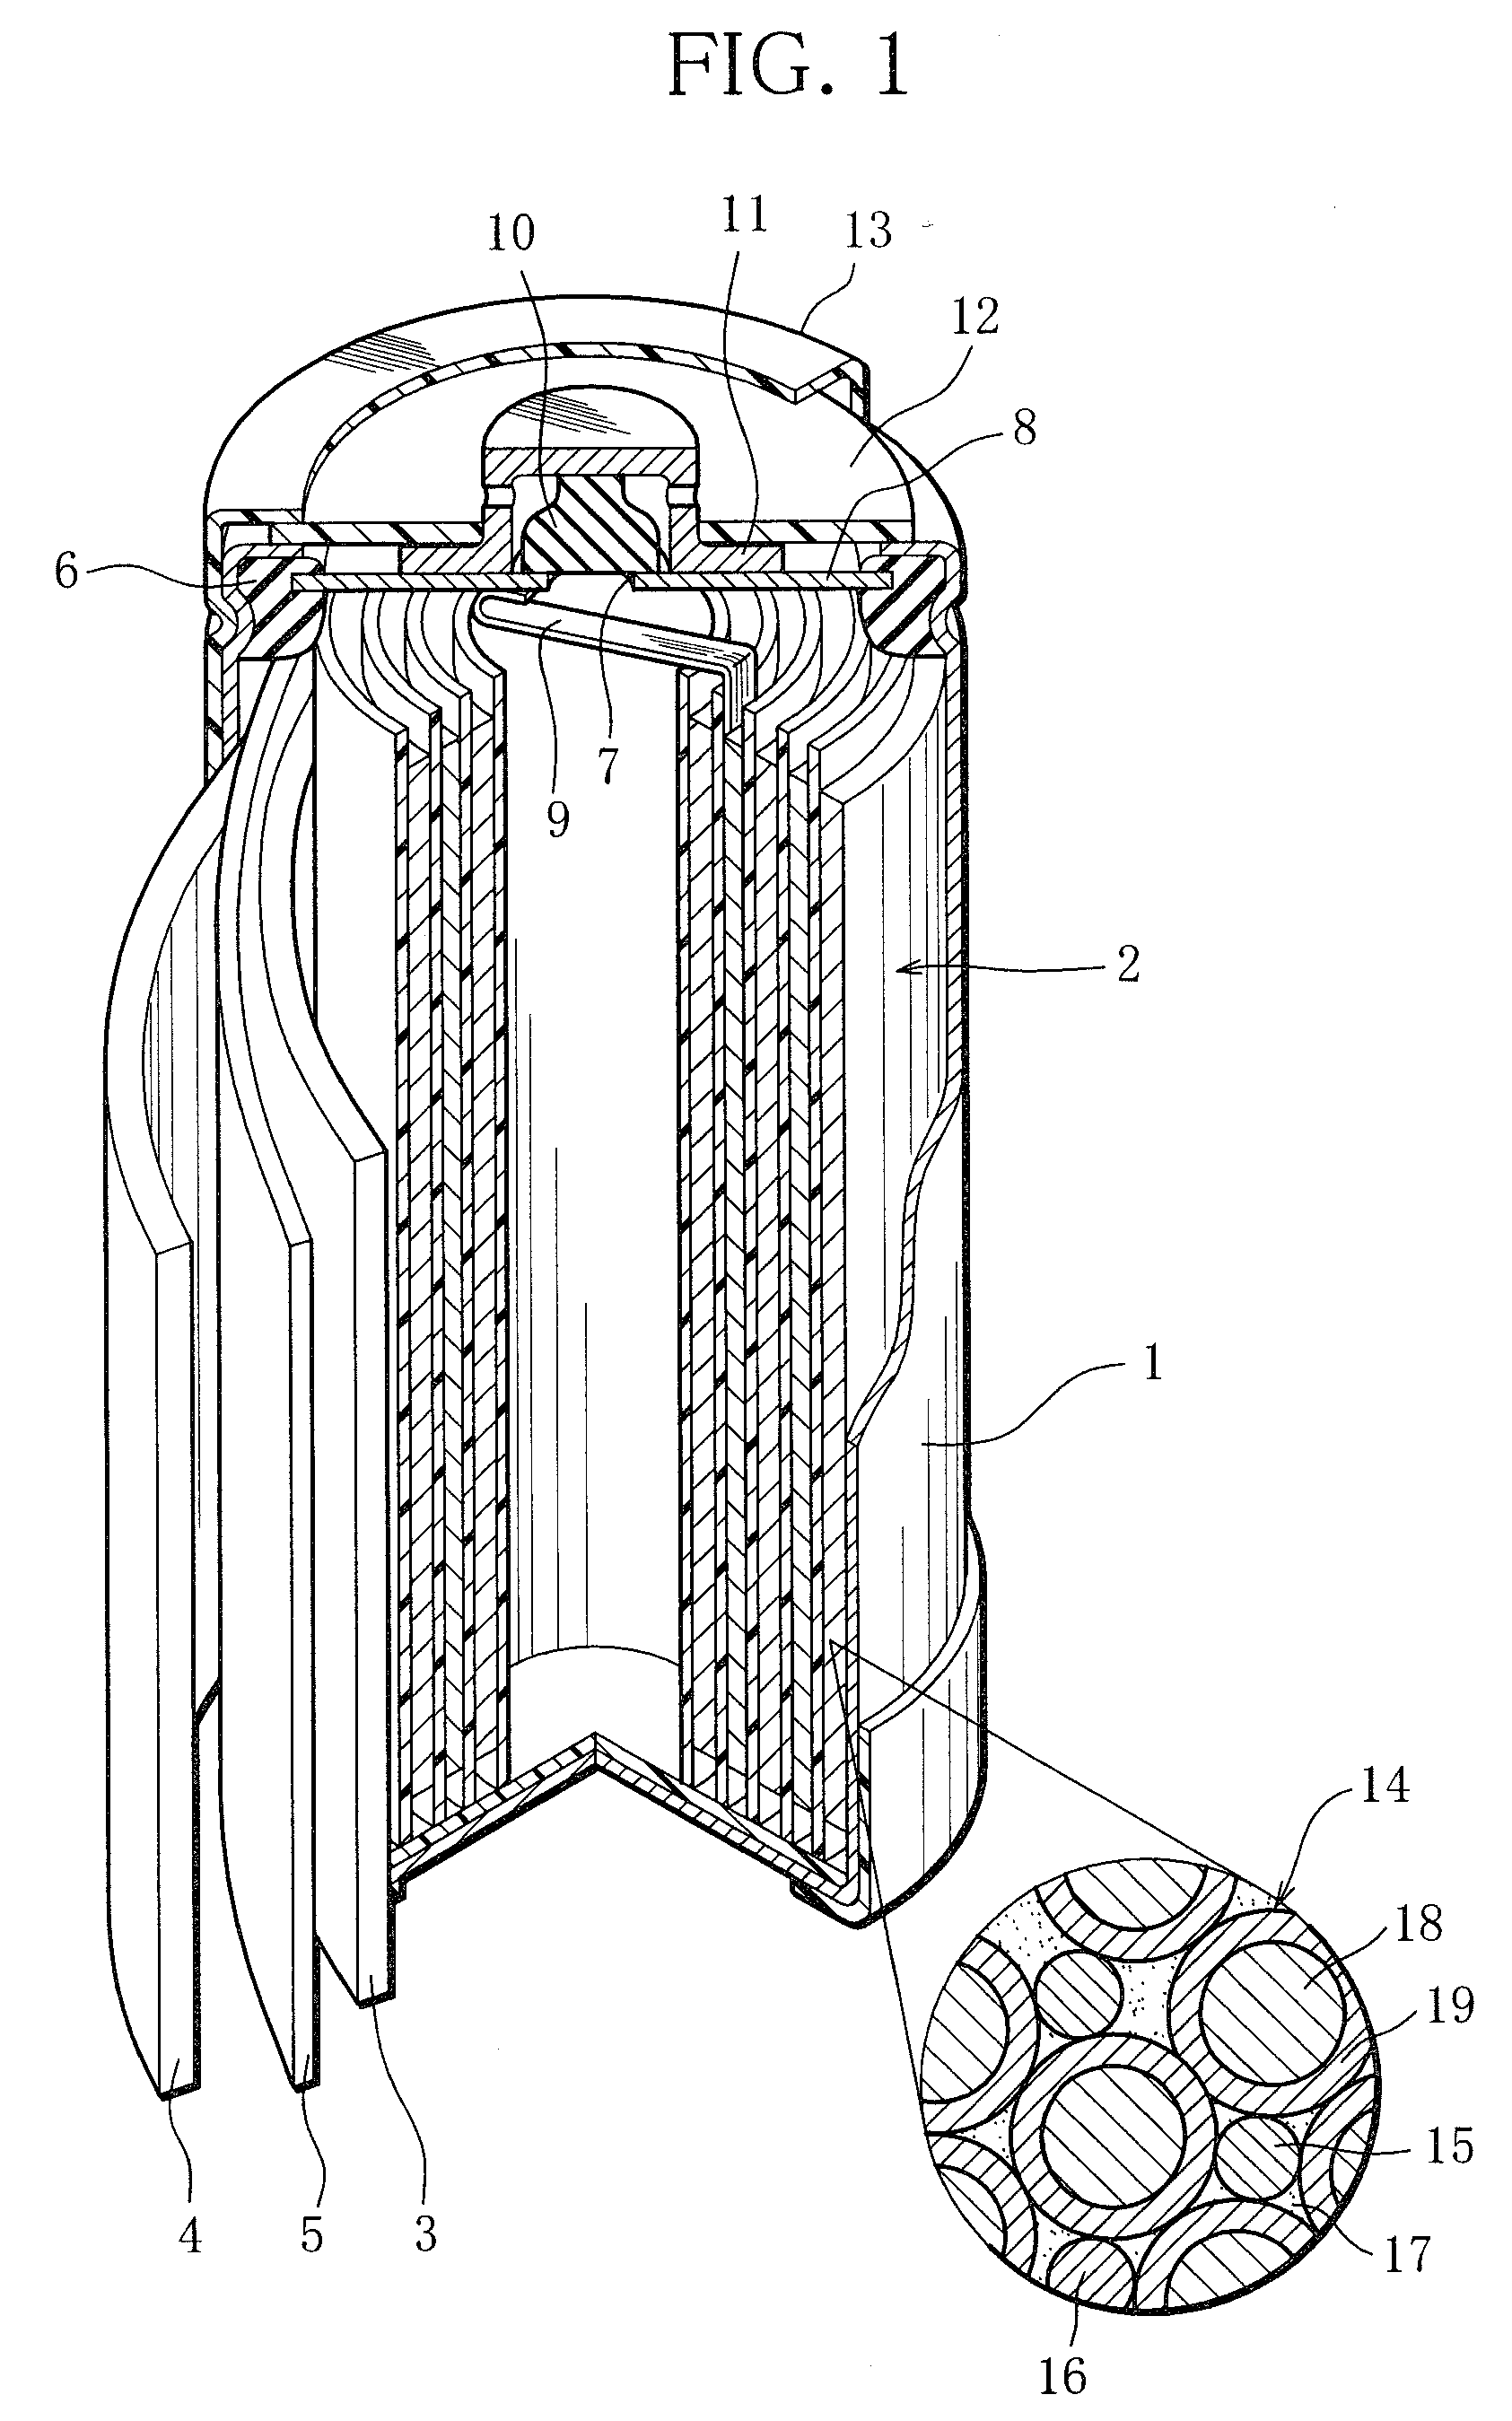 Nickel-metal hydride rechargeable cell